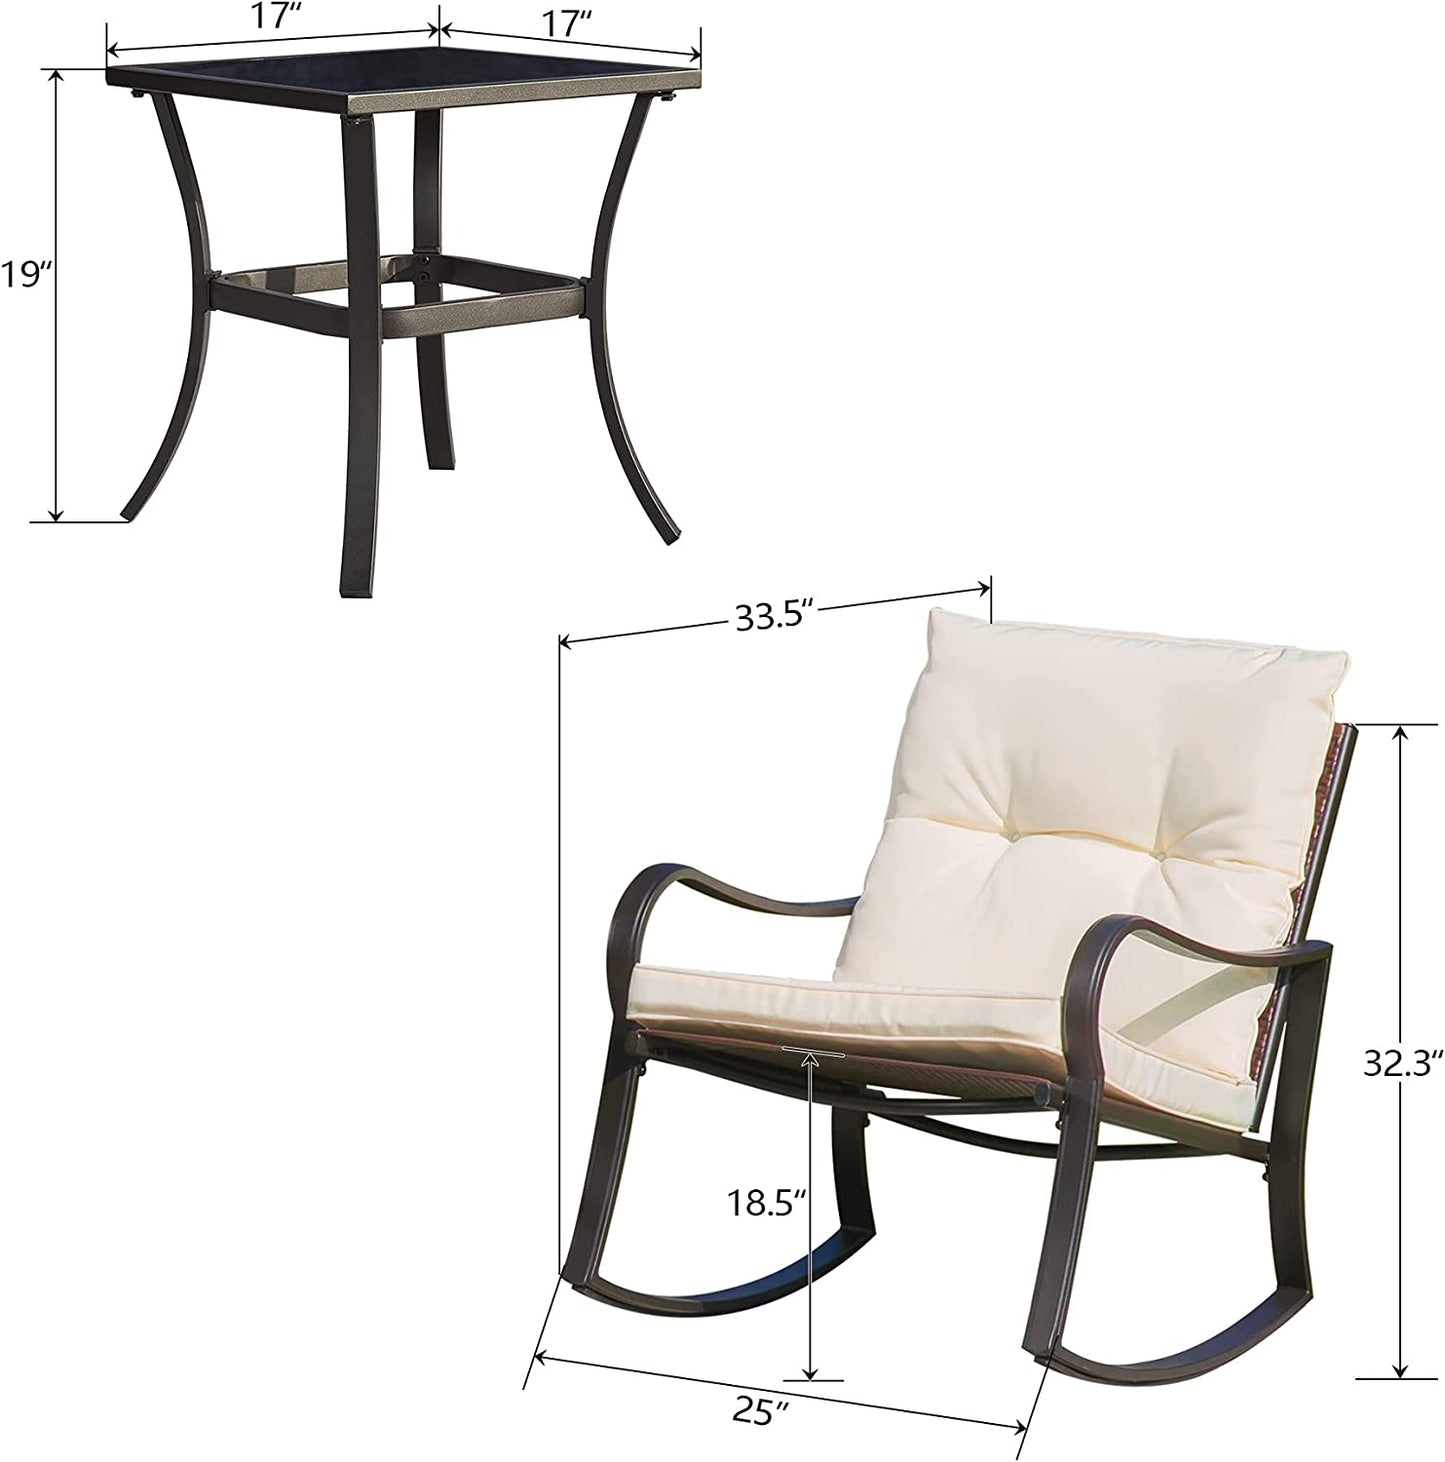 3 Piece Rocking Chair Patio Bistro Set Balcony Chairs Iron Conversation Sets With Coffee Table